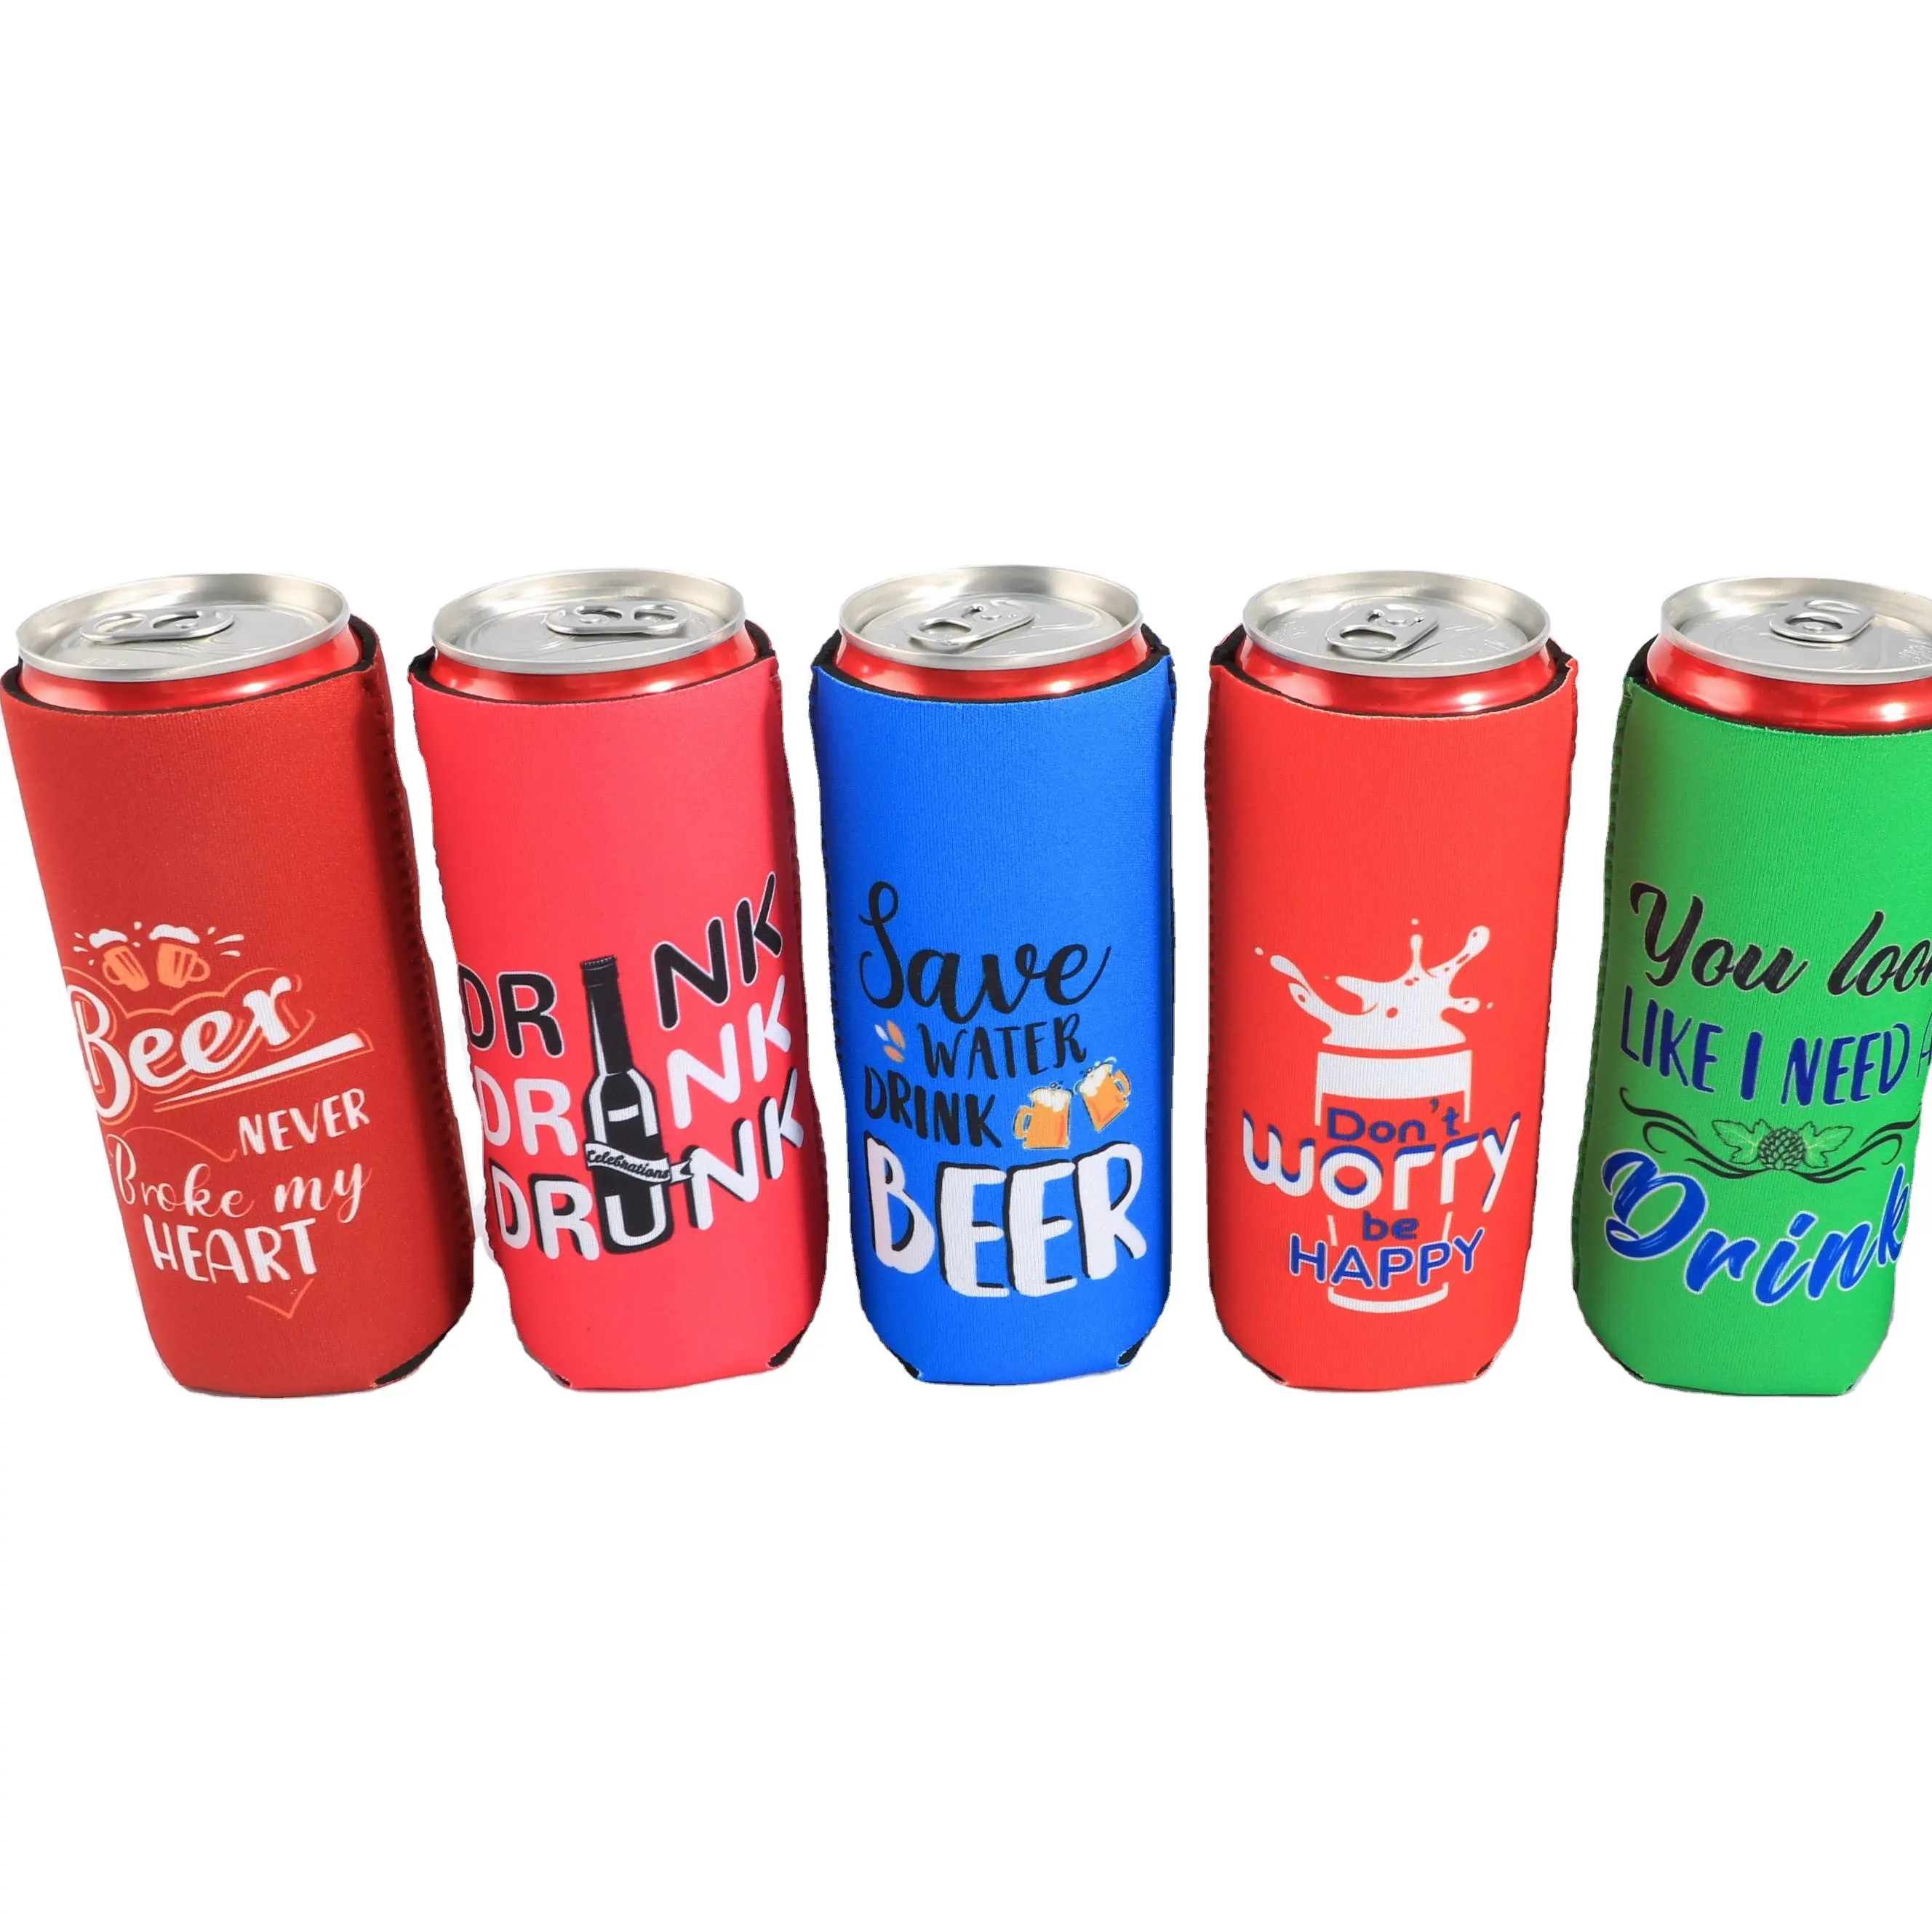 Neoprene Sublimation Printing Insulated Beer Can Holder Cooler Sleeve with 330ML Neoprene slim cooler coozies